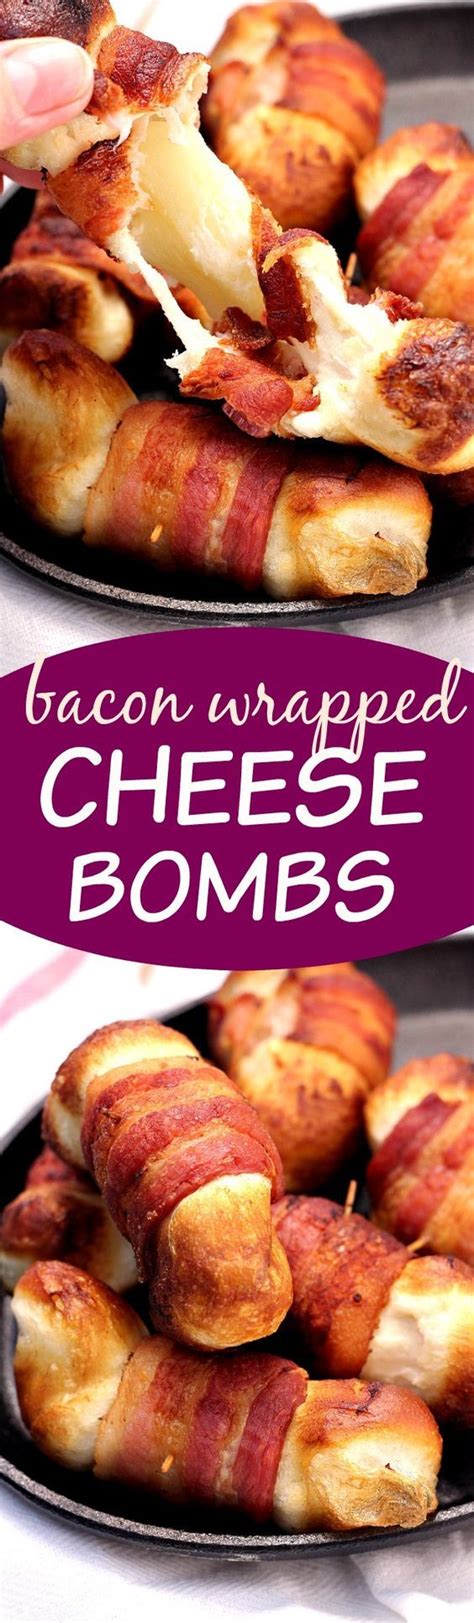 Bacon Wrapped Cheese Bombs Recipe: Bacon Recipes, Diy Food Recipes, Snack Recipes, Cooking ...